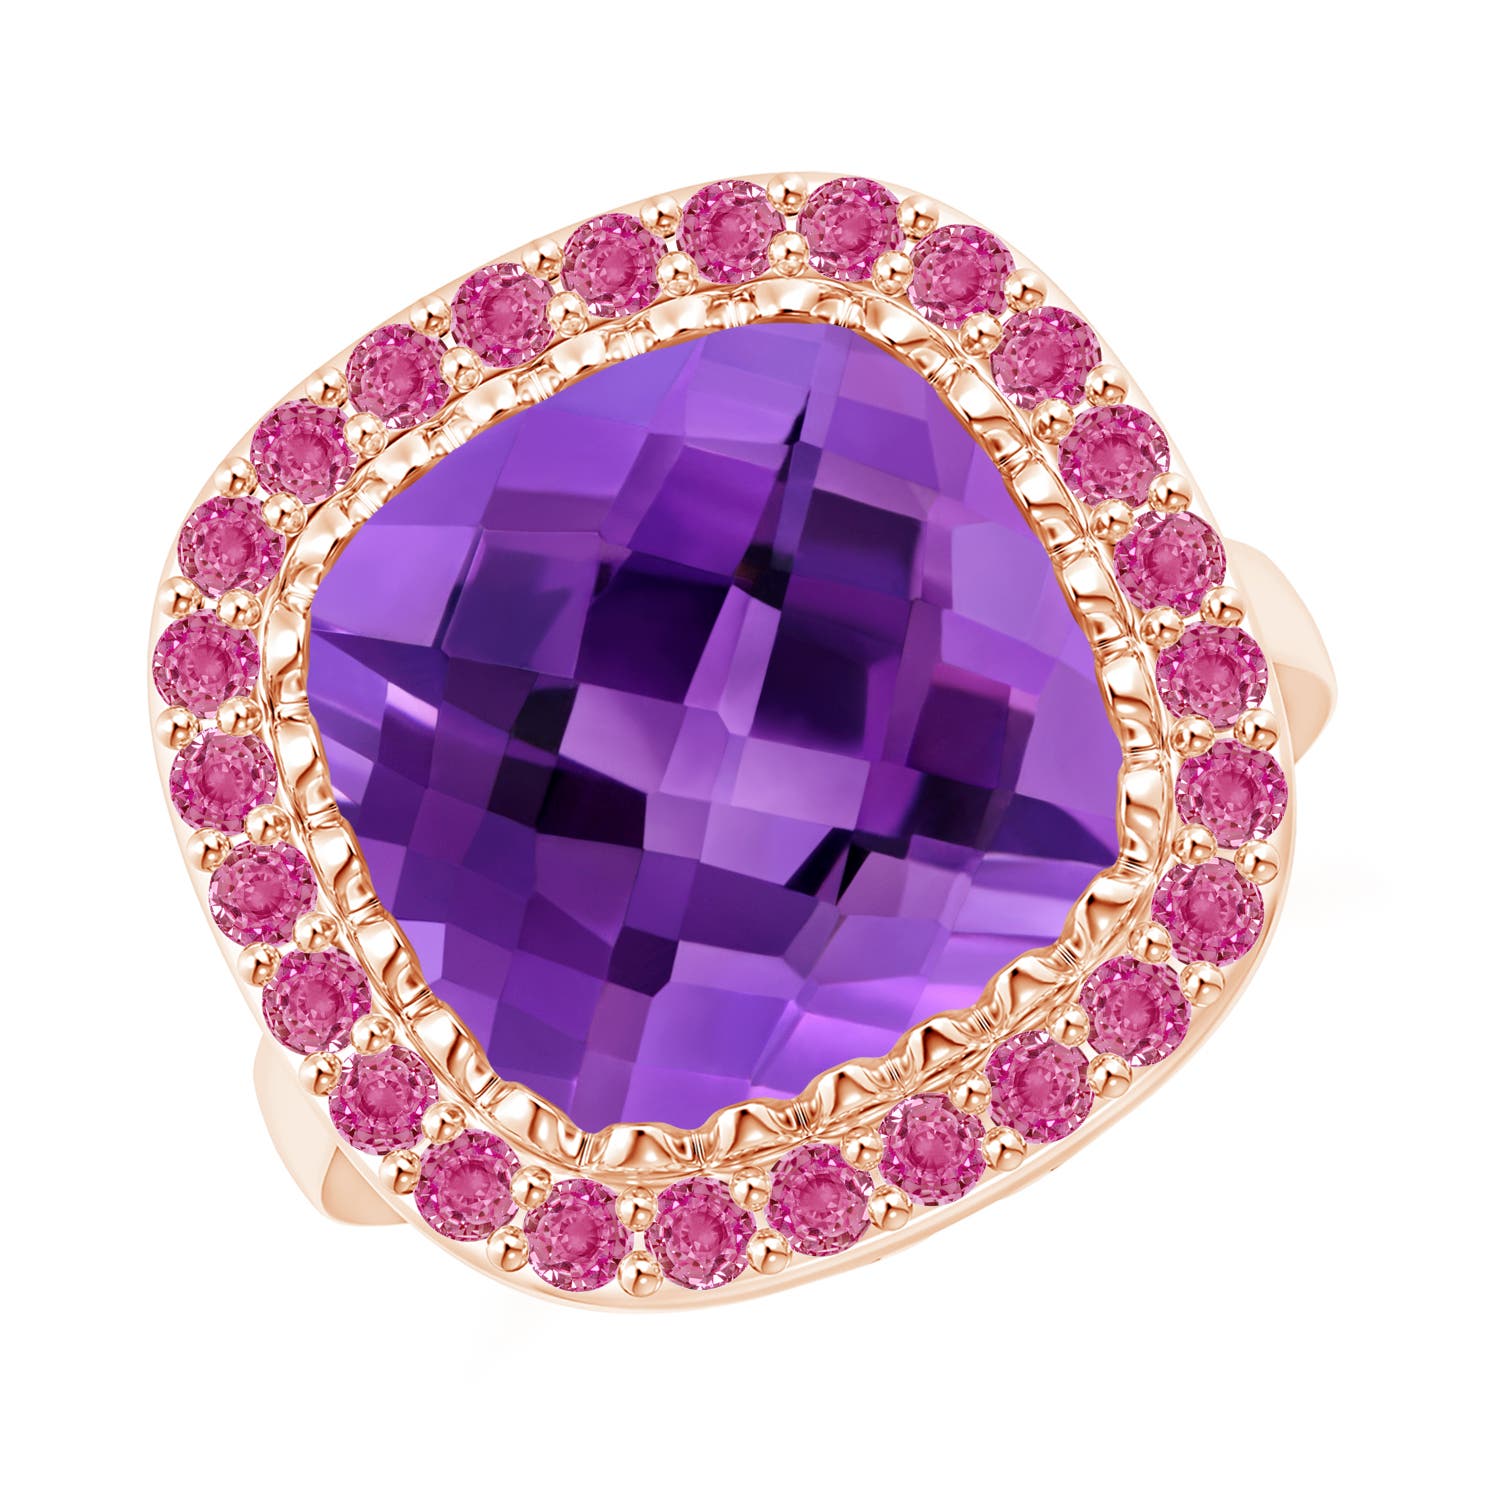 AAA - Amethyst / 6.98 CT / 14 KT Rose Gold